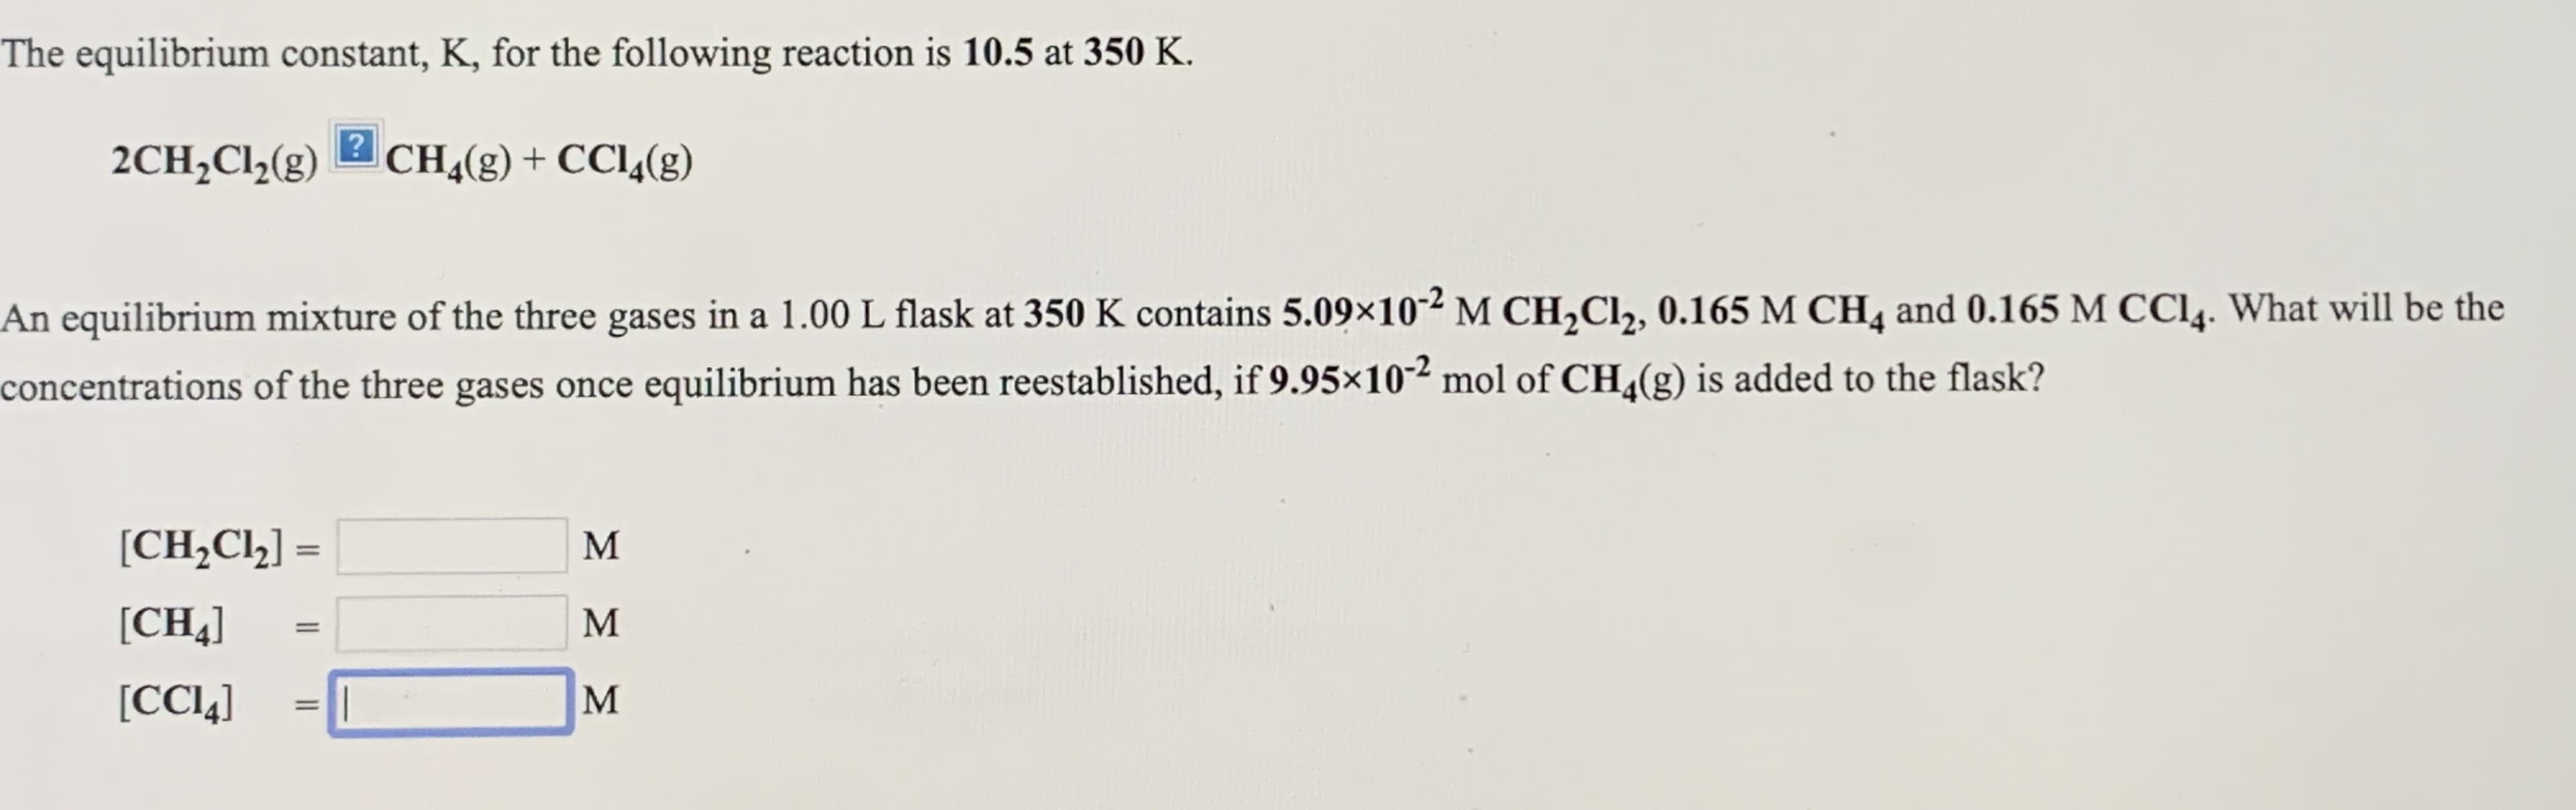 The equilibrium constant, K, for the following reaction is 10.5 at 350 K.
2CH;Cl½(g)
CH4(g) + CCl4(g)
An equilibrium mixture of the three gases in a 1.00 L flask at 350 K contains 5.09x10-² M CH,Cl, 0.165 M CH4 and 0.165 M CCI4. What will be the
concentrations of the three gases once equilibrium has been reestablished, if 9.95×10² mol of CH,(g) is added to the flask?
[CH,Cl½] =
M
%3D
[CH4]
M
[CCI4]
M
